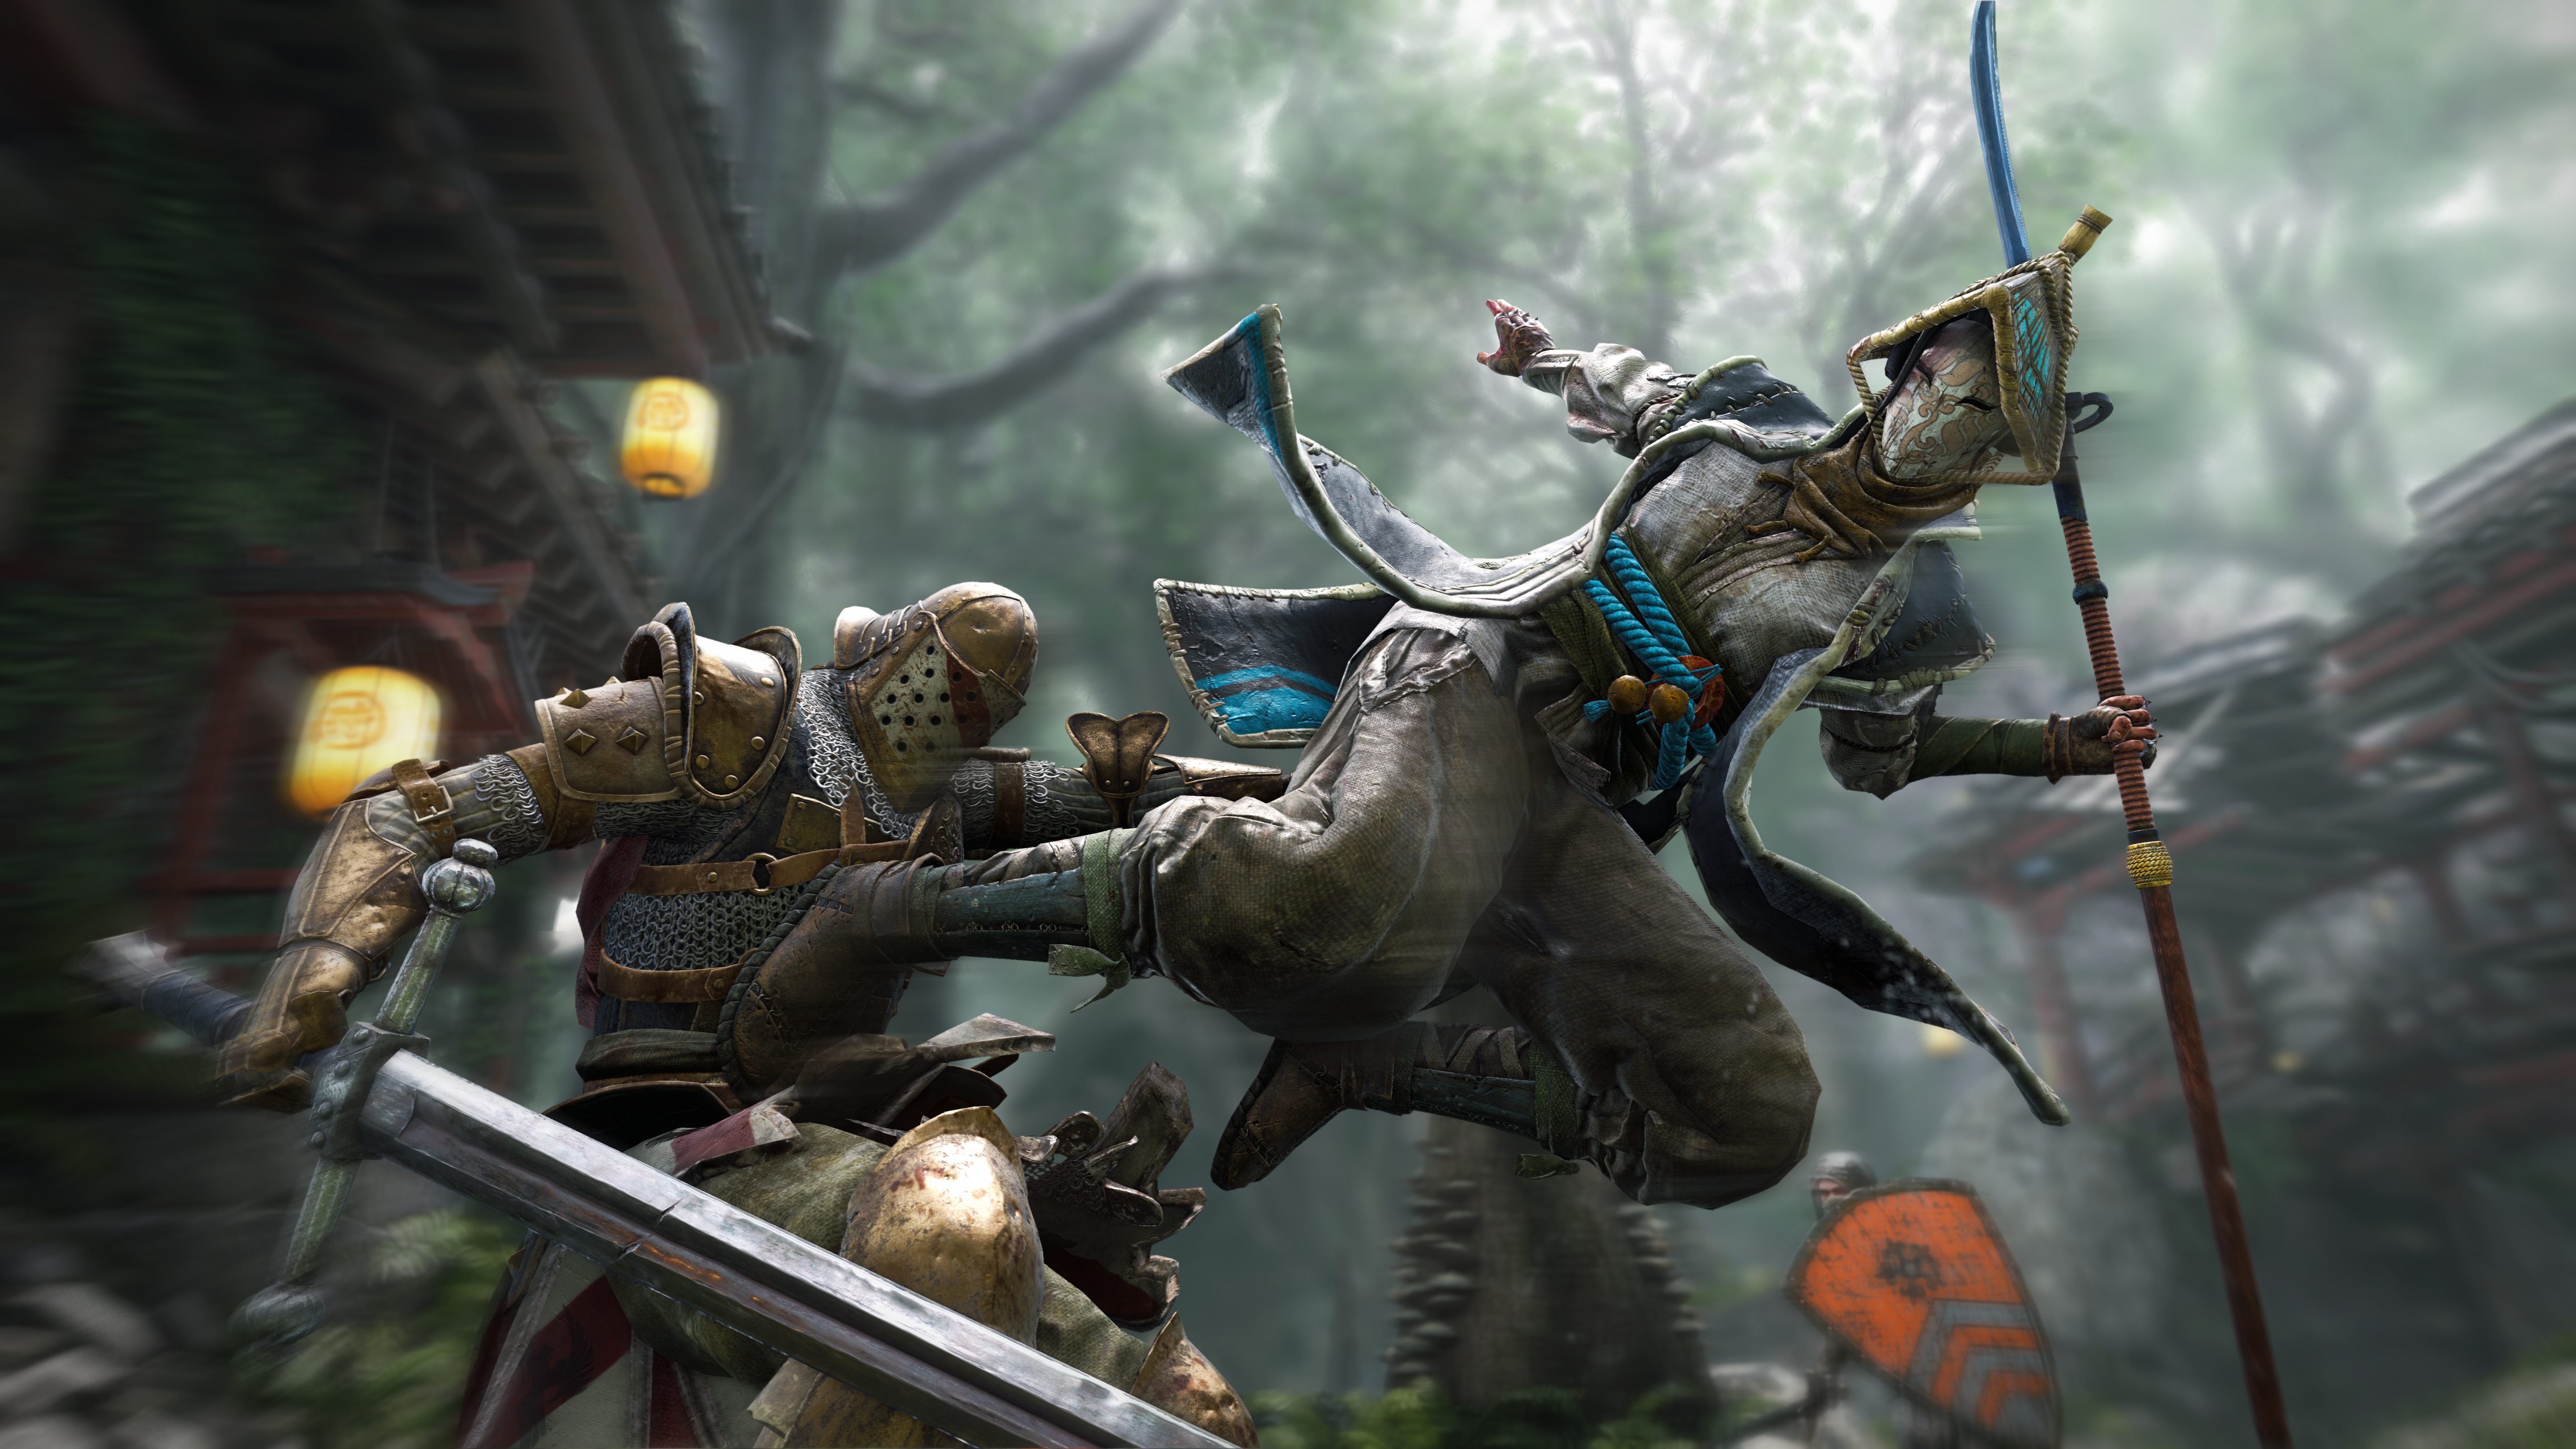 Epic Games - For Honor is free to download and play from